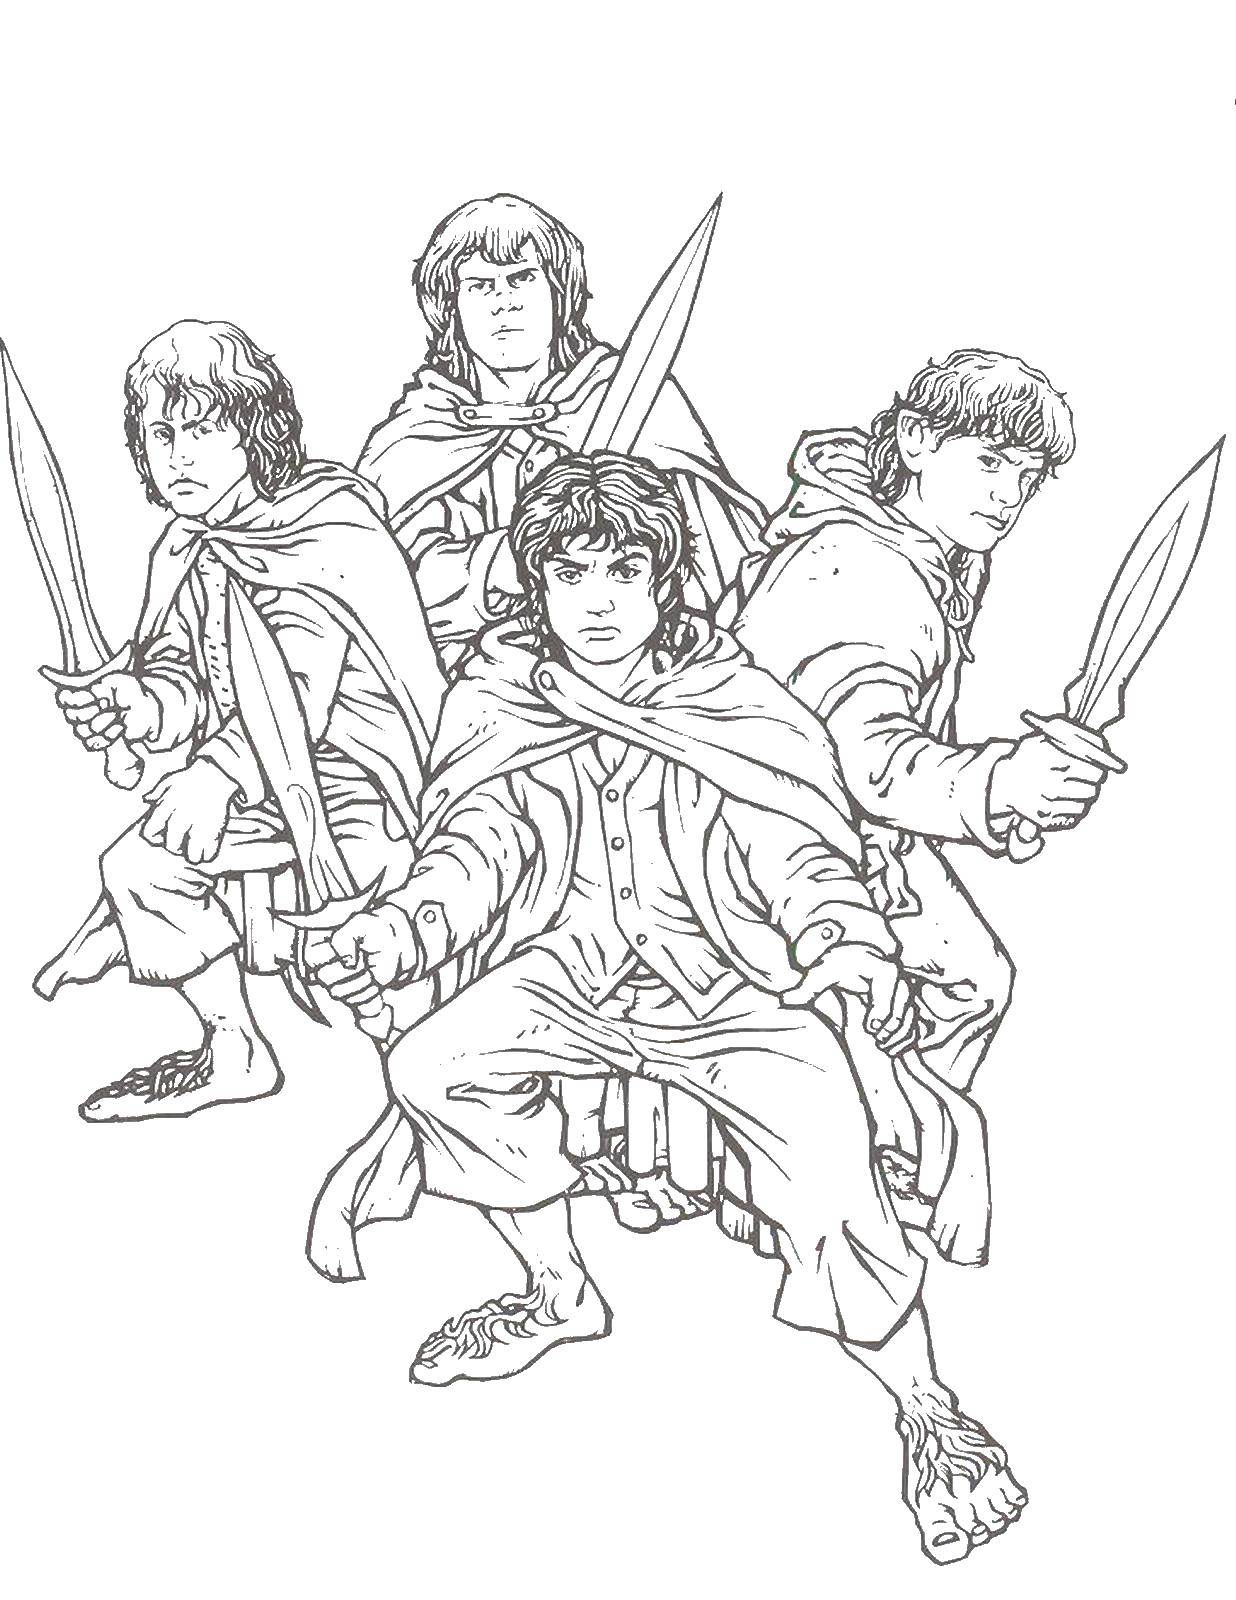 Coloring Hobbits with swords. Category Lord of the rings. Tags:  the hobbit, the Lord of the rings.